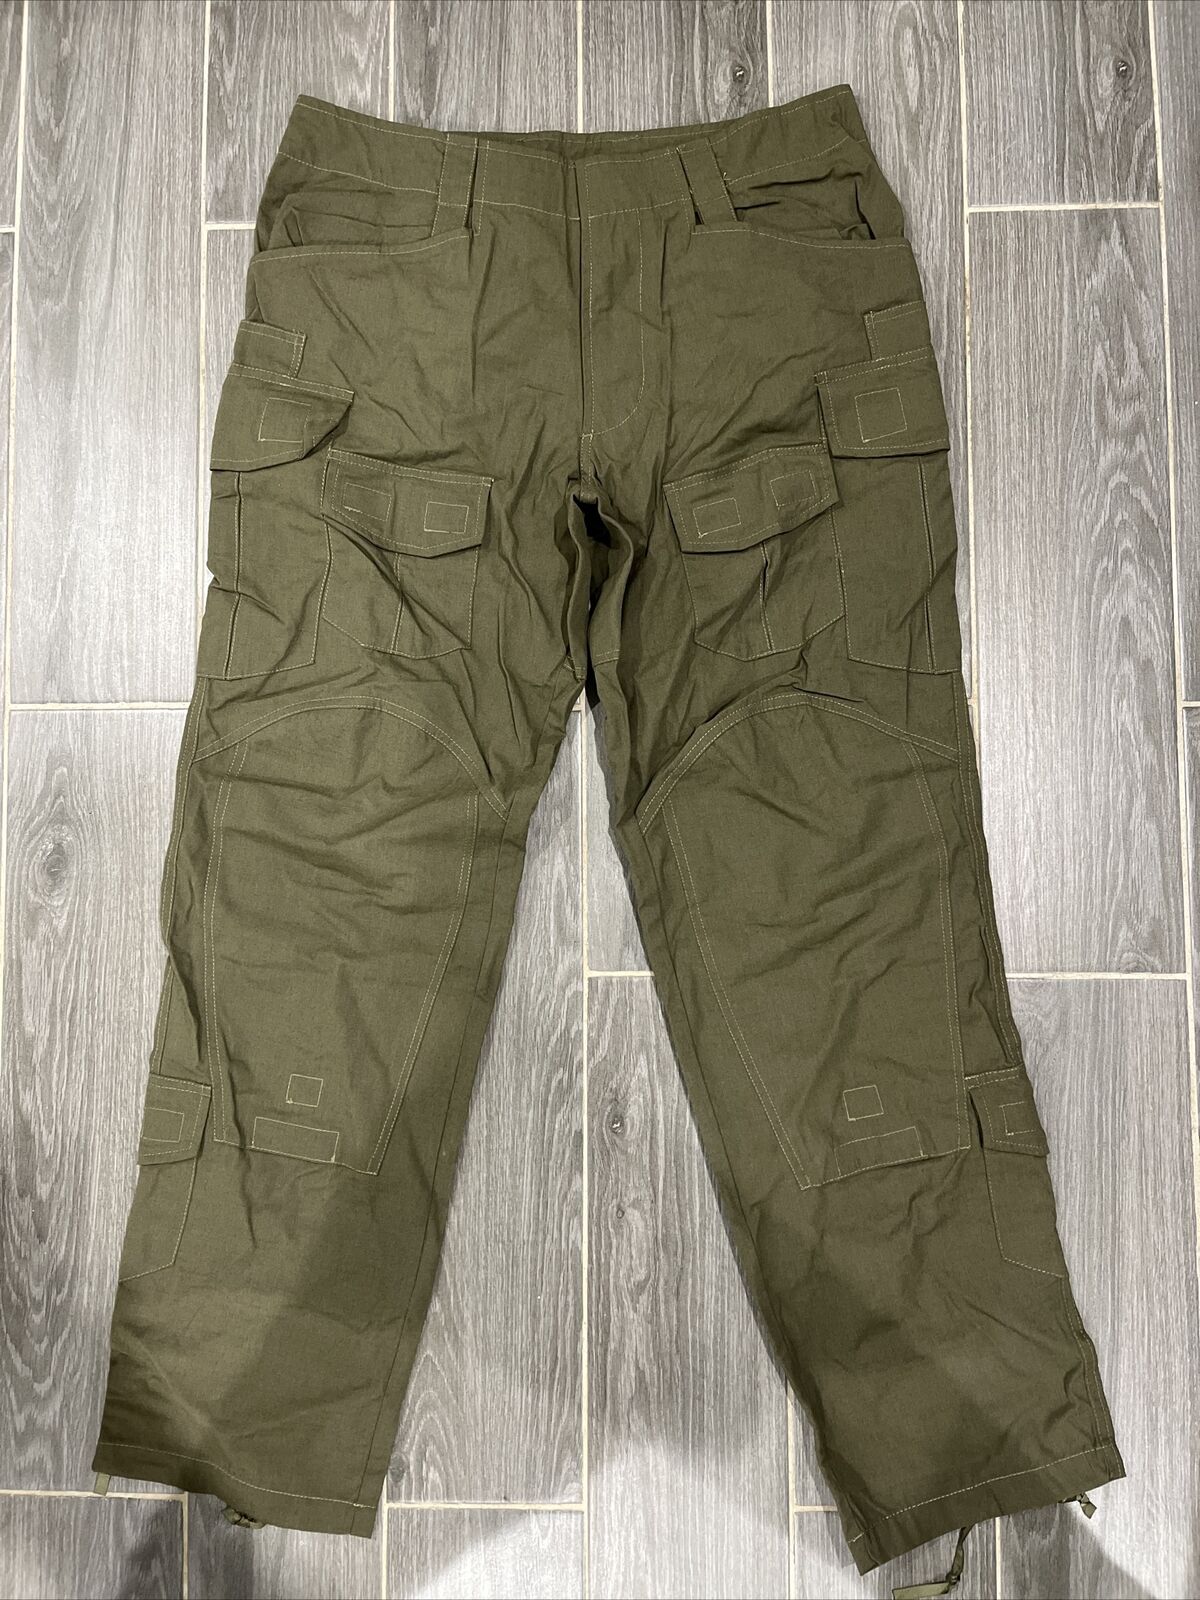 Crye Precision OD Green Size 34R All Weather Field Pants - Irregular